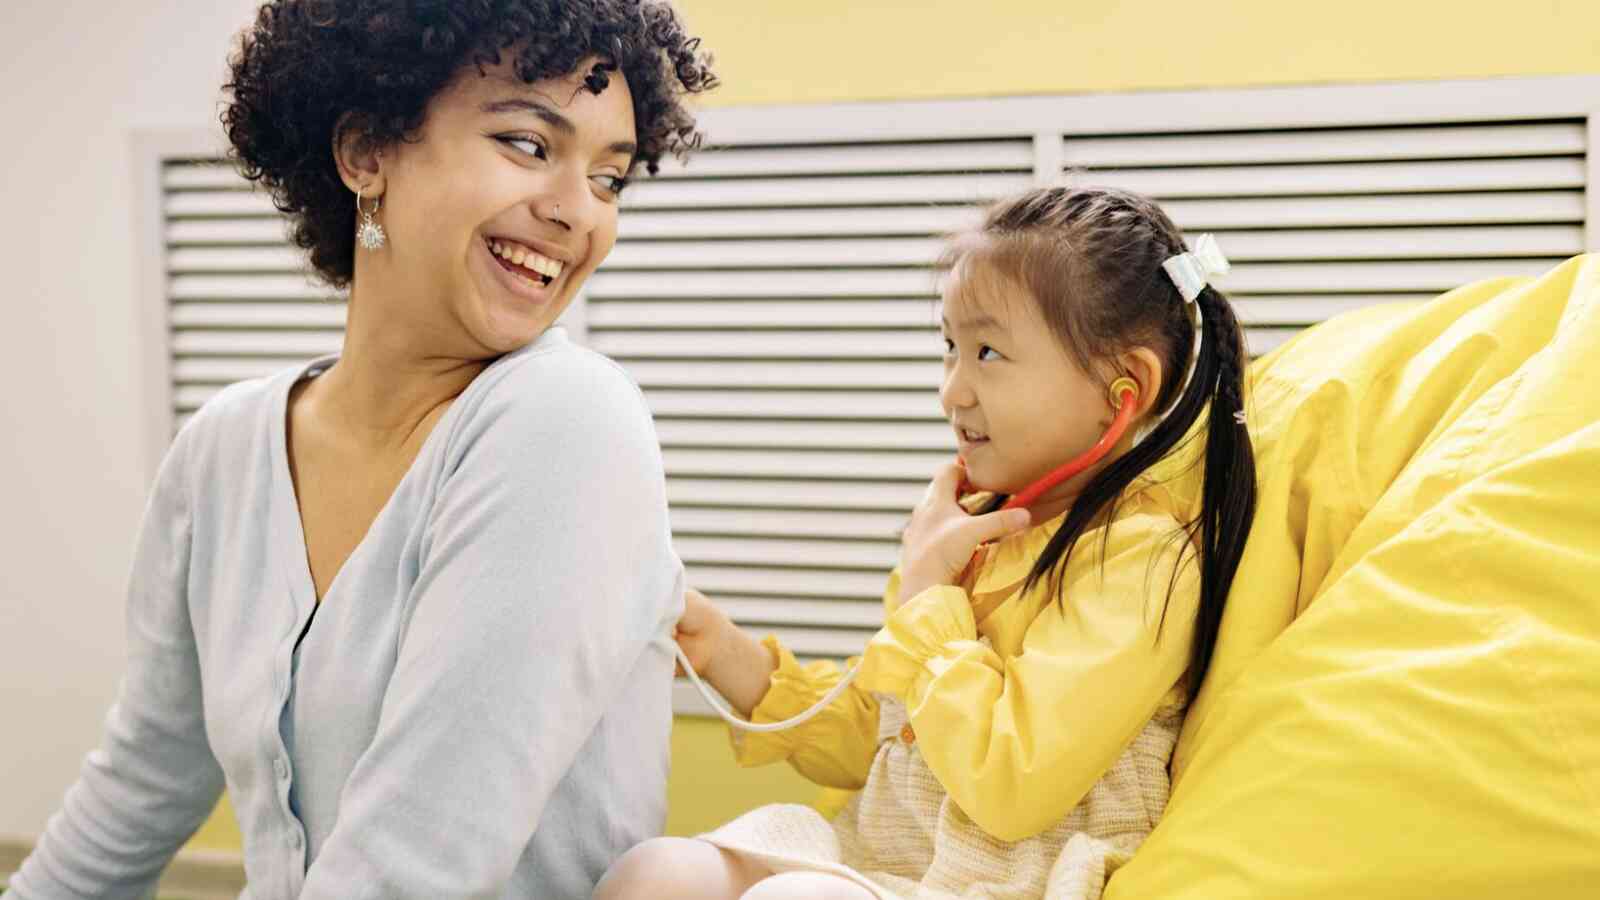 An adult female is sitting next to a young child who is sitting on a bright yellow bean bag chair. The young child has a toy stethoscope in her ears and has the other end placed on the adult female's back. They are smiling at one another. Both individuals have light brown skin.